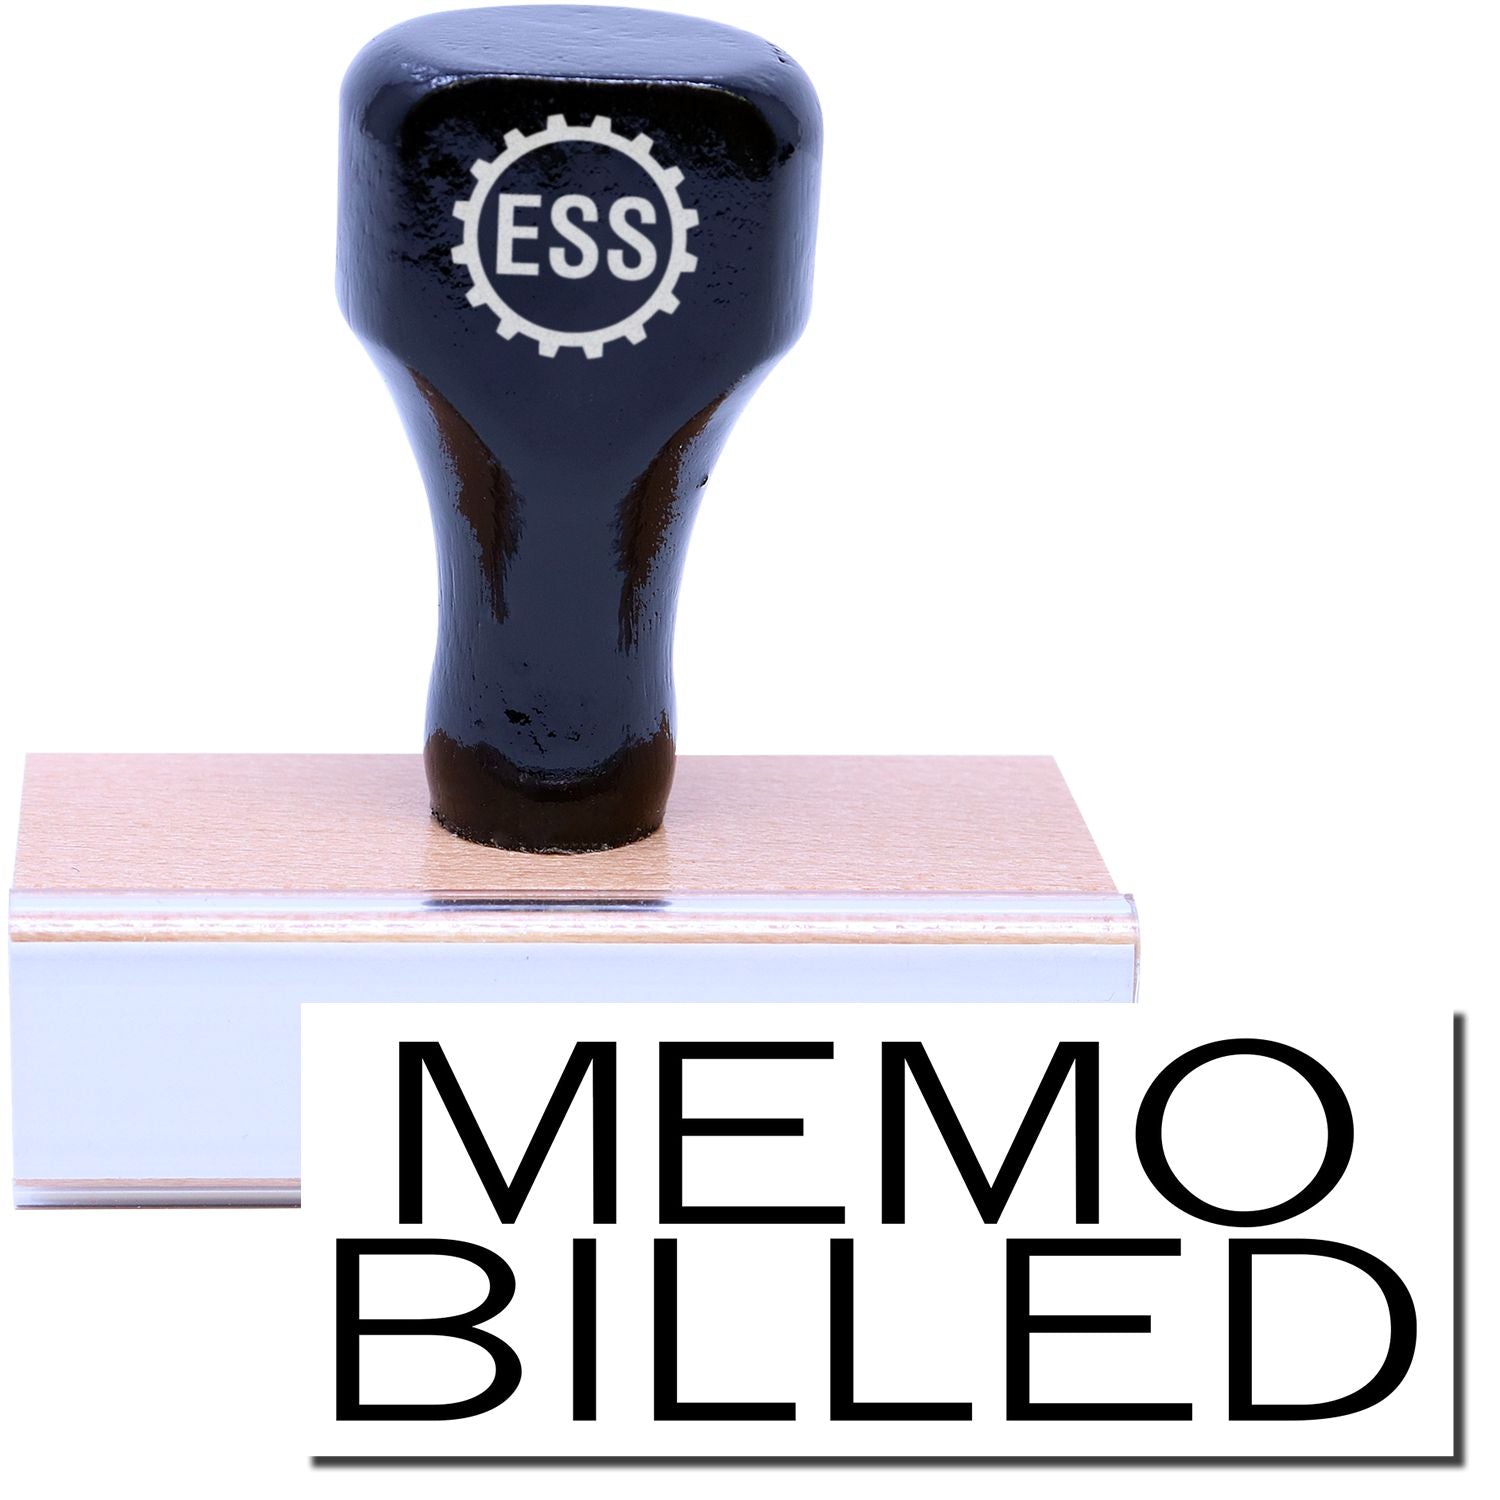 A stock office rubber stamp with a stamped image showing how the text "MEMO BILLED" in a large font is displayed after stamping.